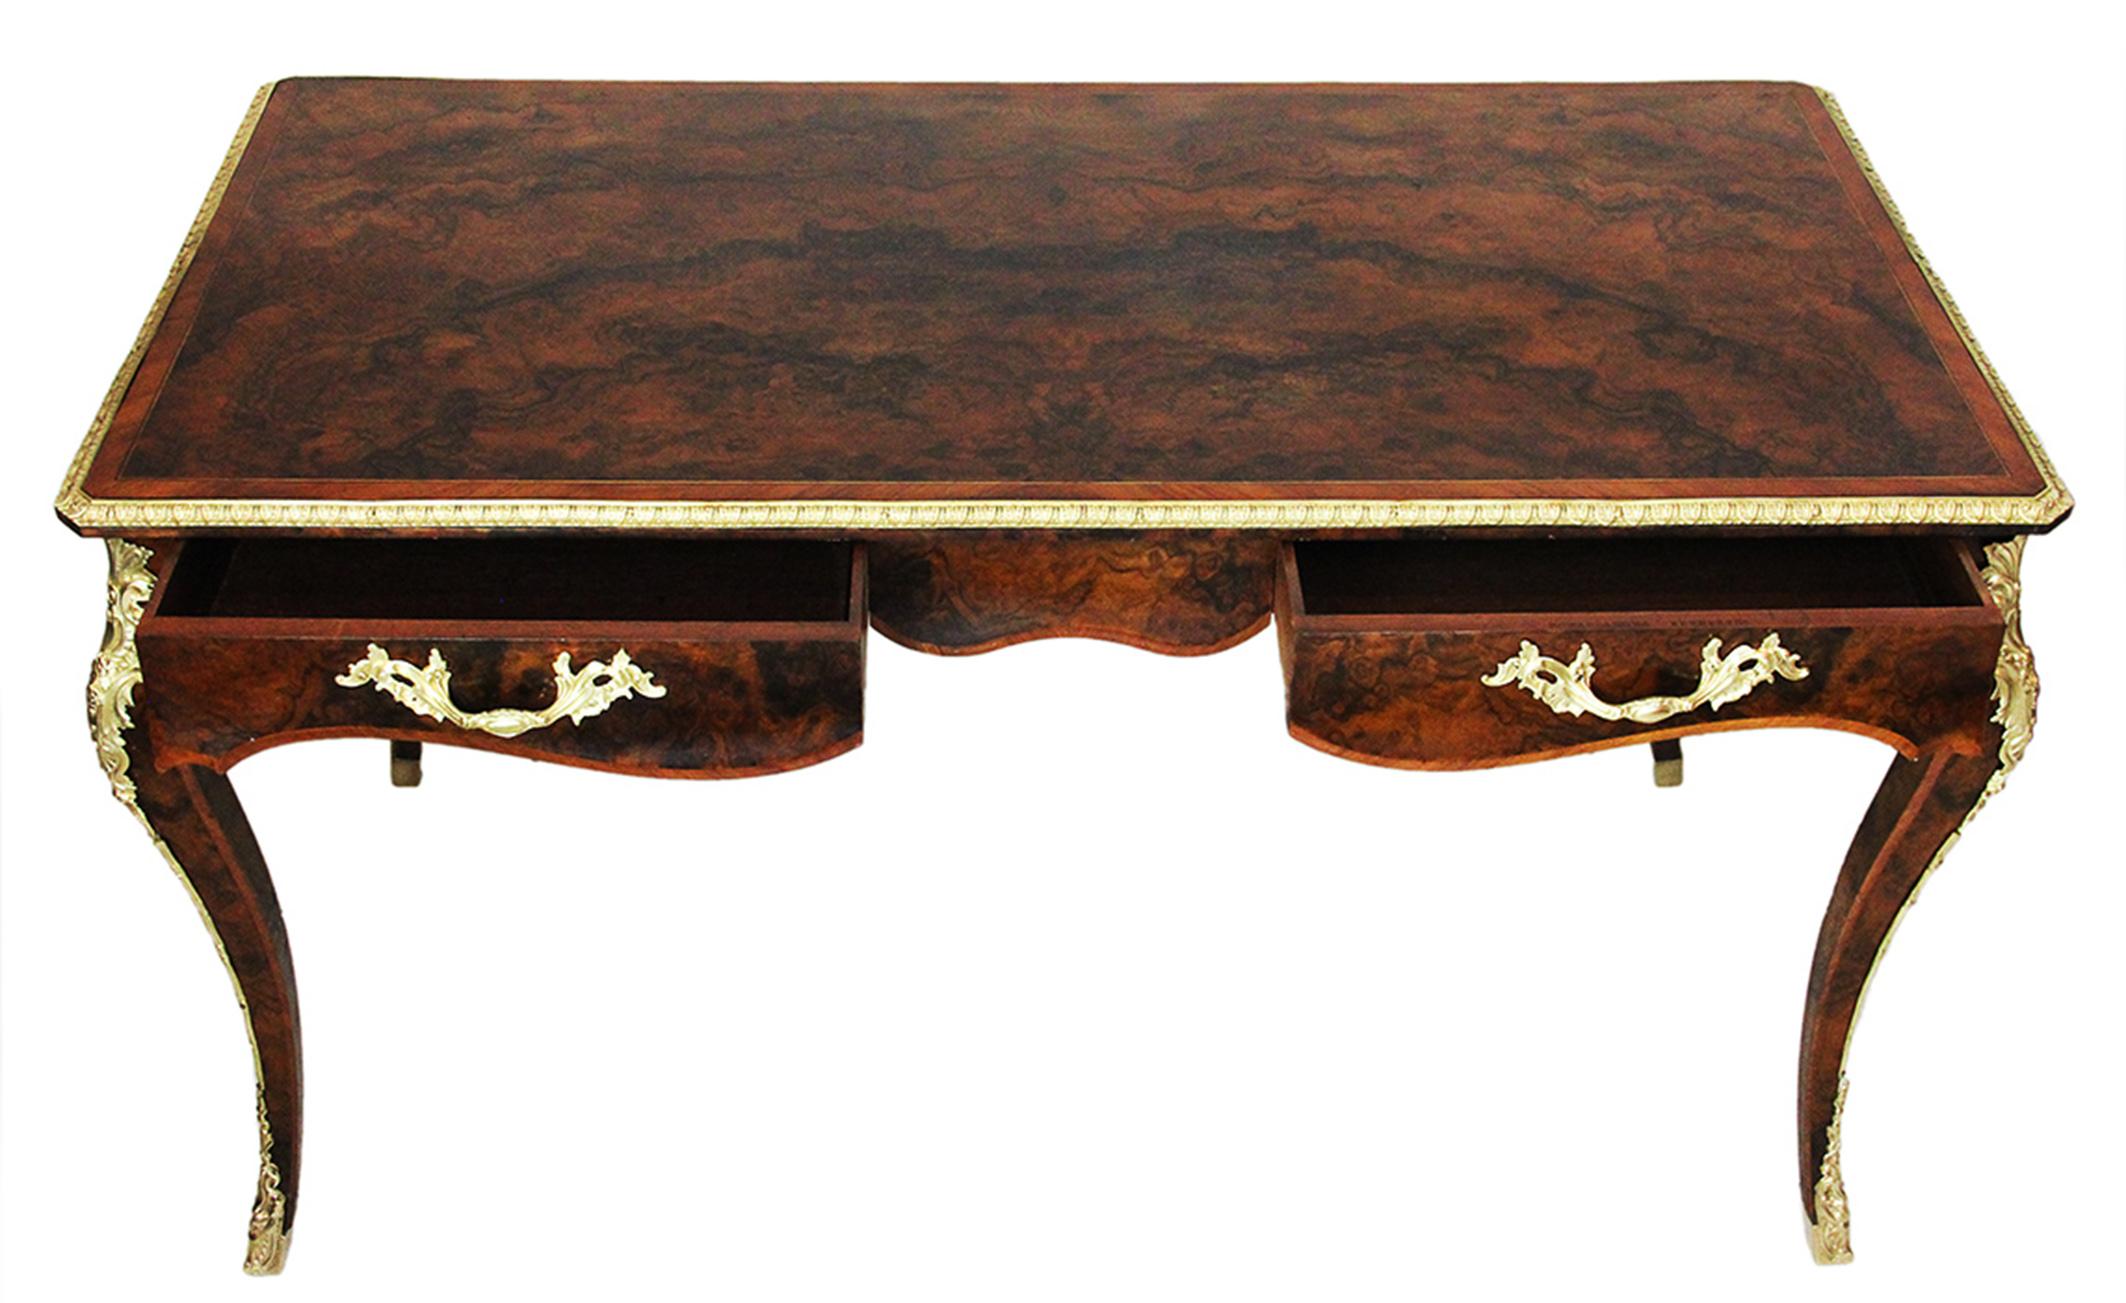 19th Century Howard & Sons Desk in burr walnut and gilt bronze ornaments :
Superb desk in burr walnut and rich ornaments of gilt bronze. Exceptional work of marquetry and veneer in burr walnut. Stamp of the famous English workshop Howard and Sons,